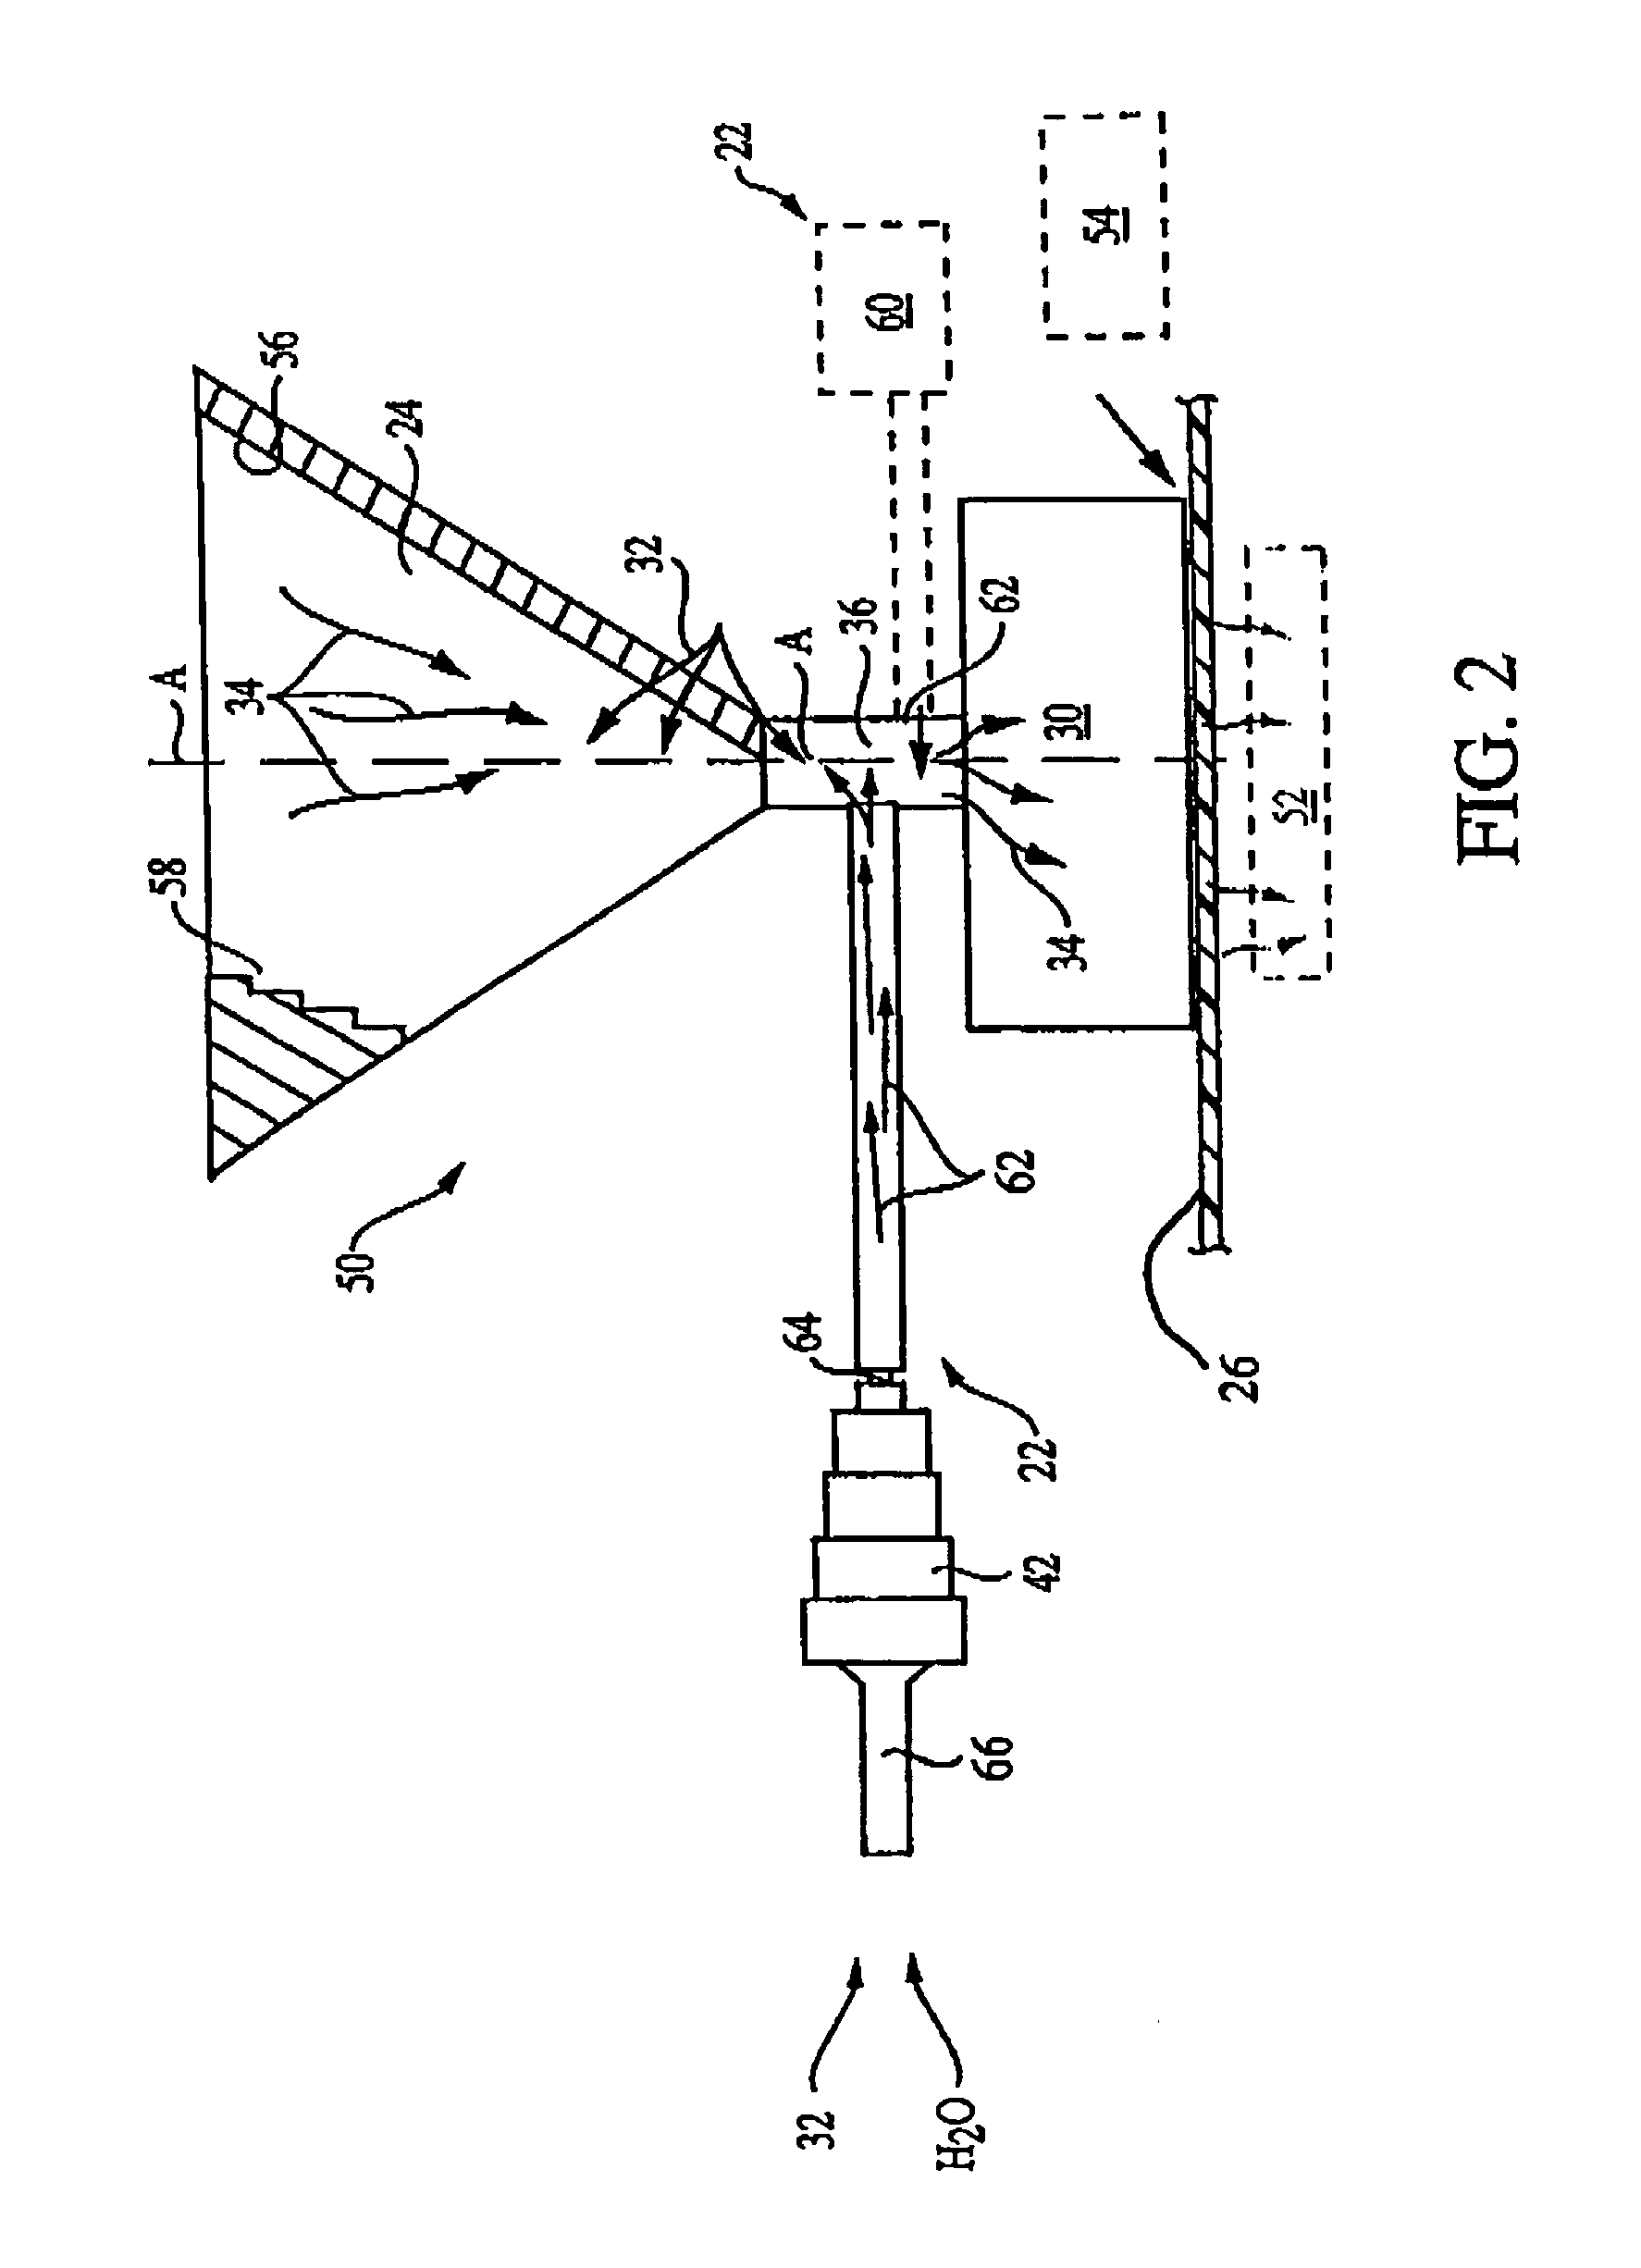 Method and apparatus for enhanced particle collection efficiency